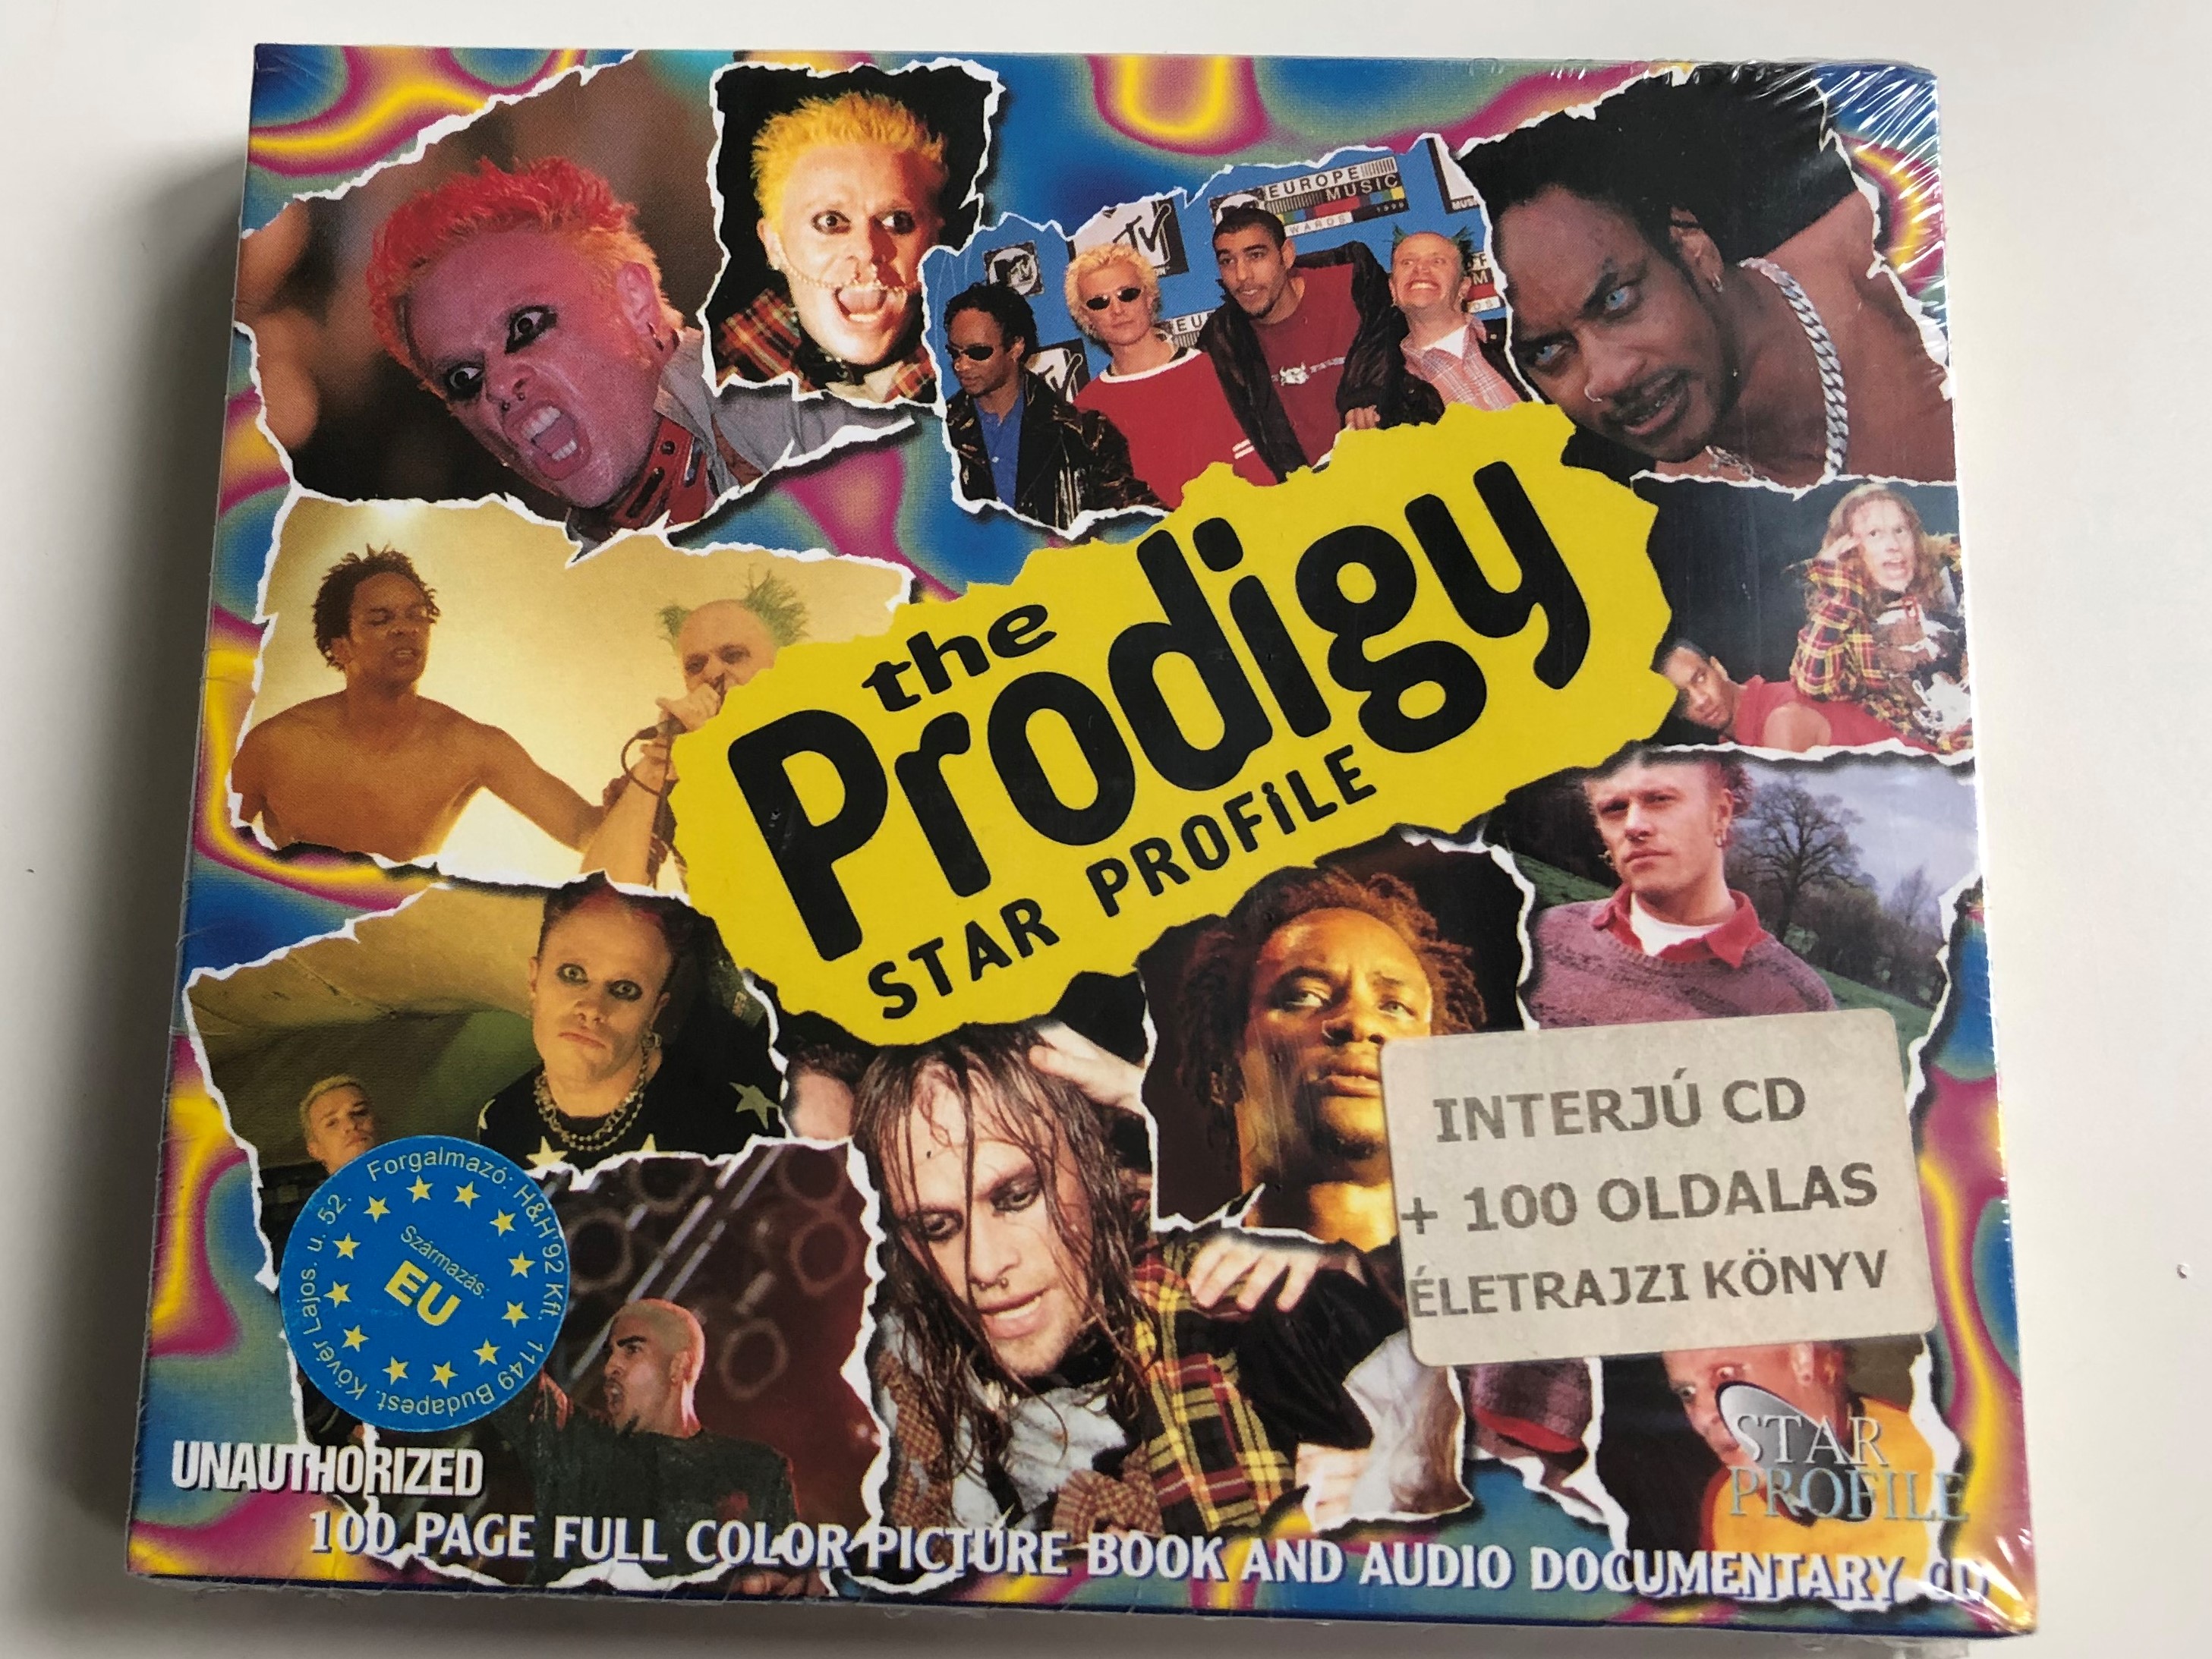 prodigy-star-profile-100-page-full-color-picture-book-and-audio-documentary-cd-mastertone-audio-cd-collectors-book-658926808523-1-.jpg